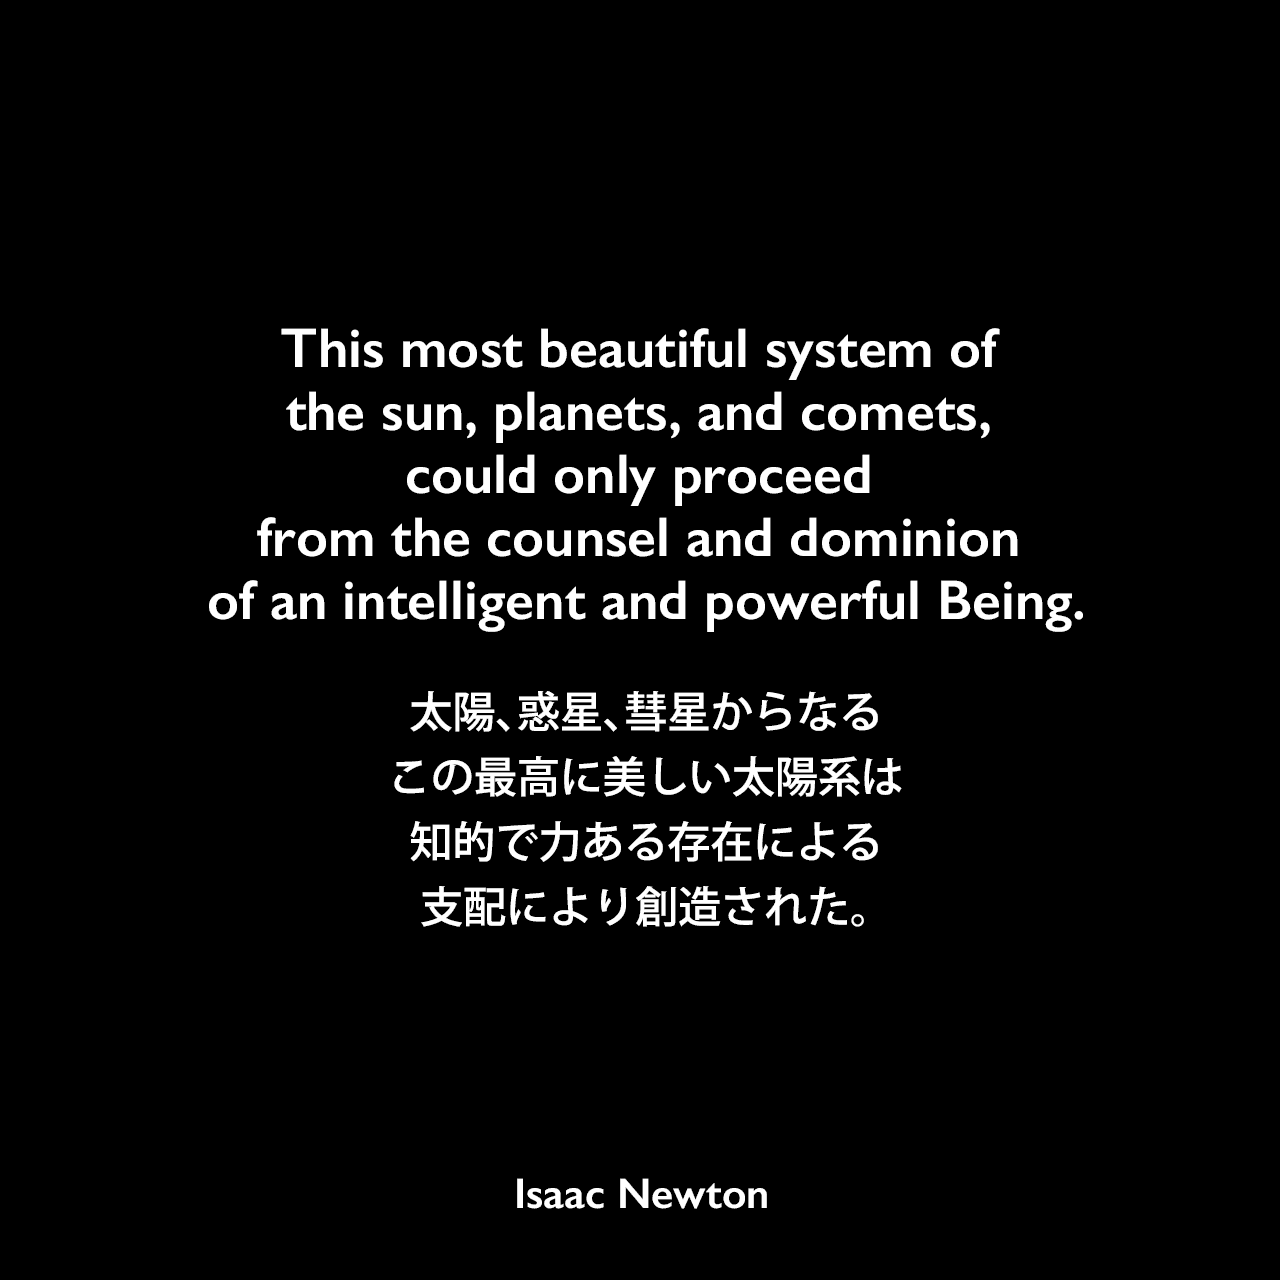 This most beautiful system of the sun, planets, and comets, could only proceed from the counsel and dominion of an intelligent and powerful Being.太陽、惑星、彗星からなるこの最高に美しい太陽系は、知的で力ある存在による支配により創造された。- ニュートンの本「自然哲学の数学的諸原理」よりIsaac Newton